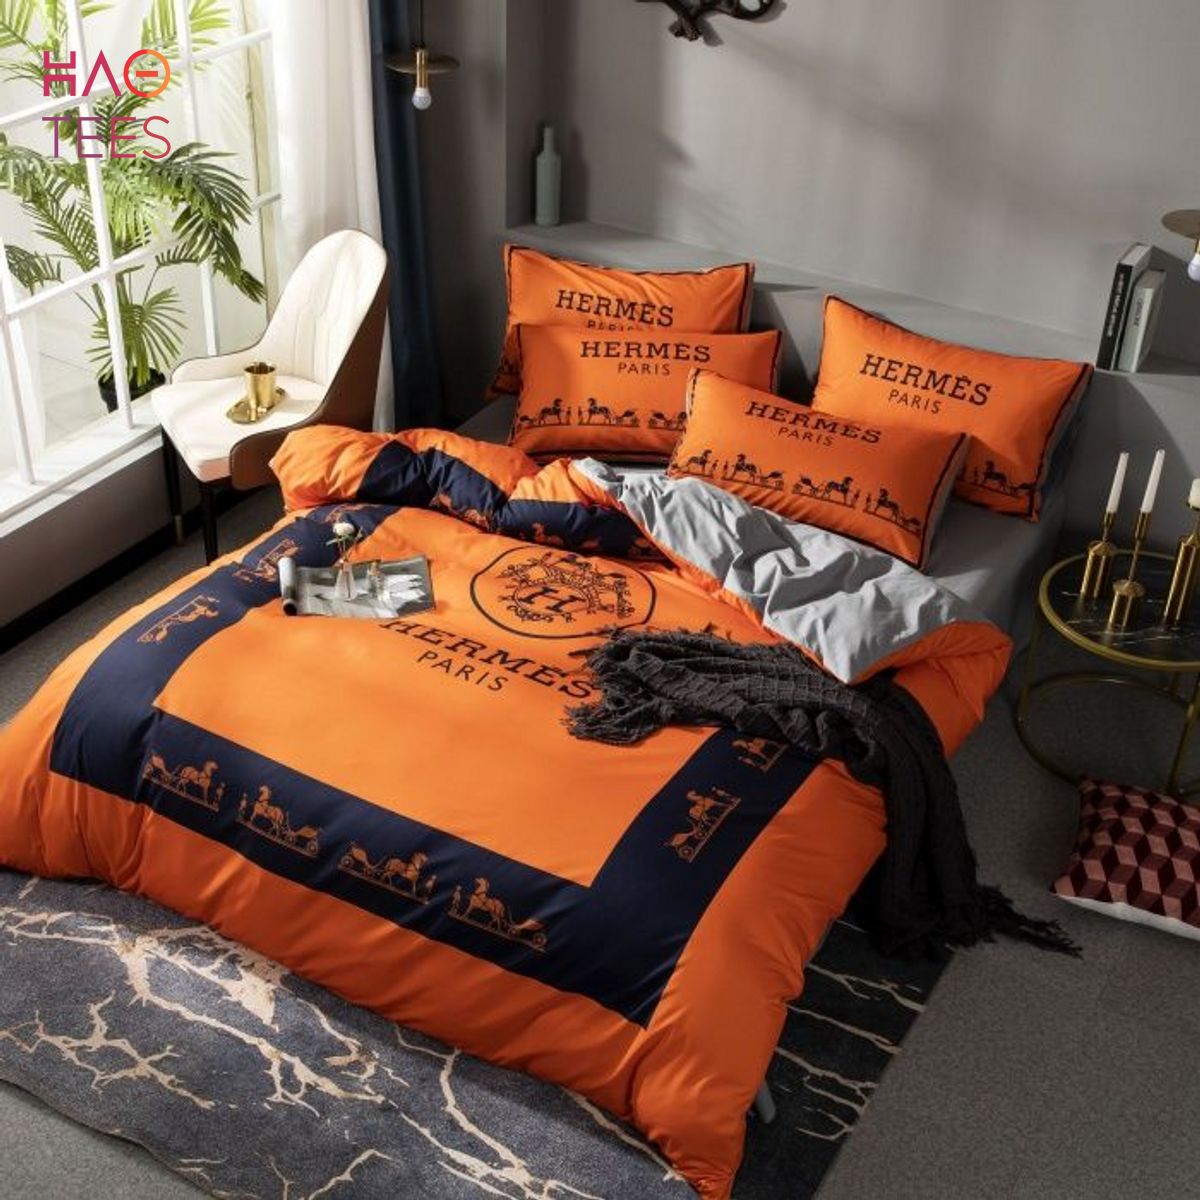 NEW Hermes Paris Luxury Brand Bedding Sets And Bedroom Sets